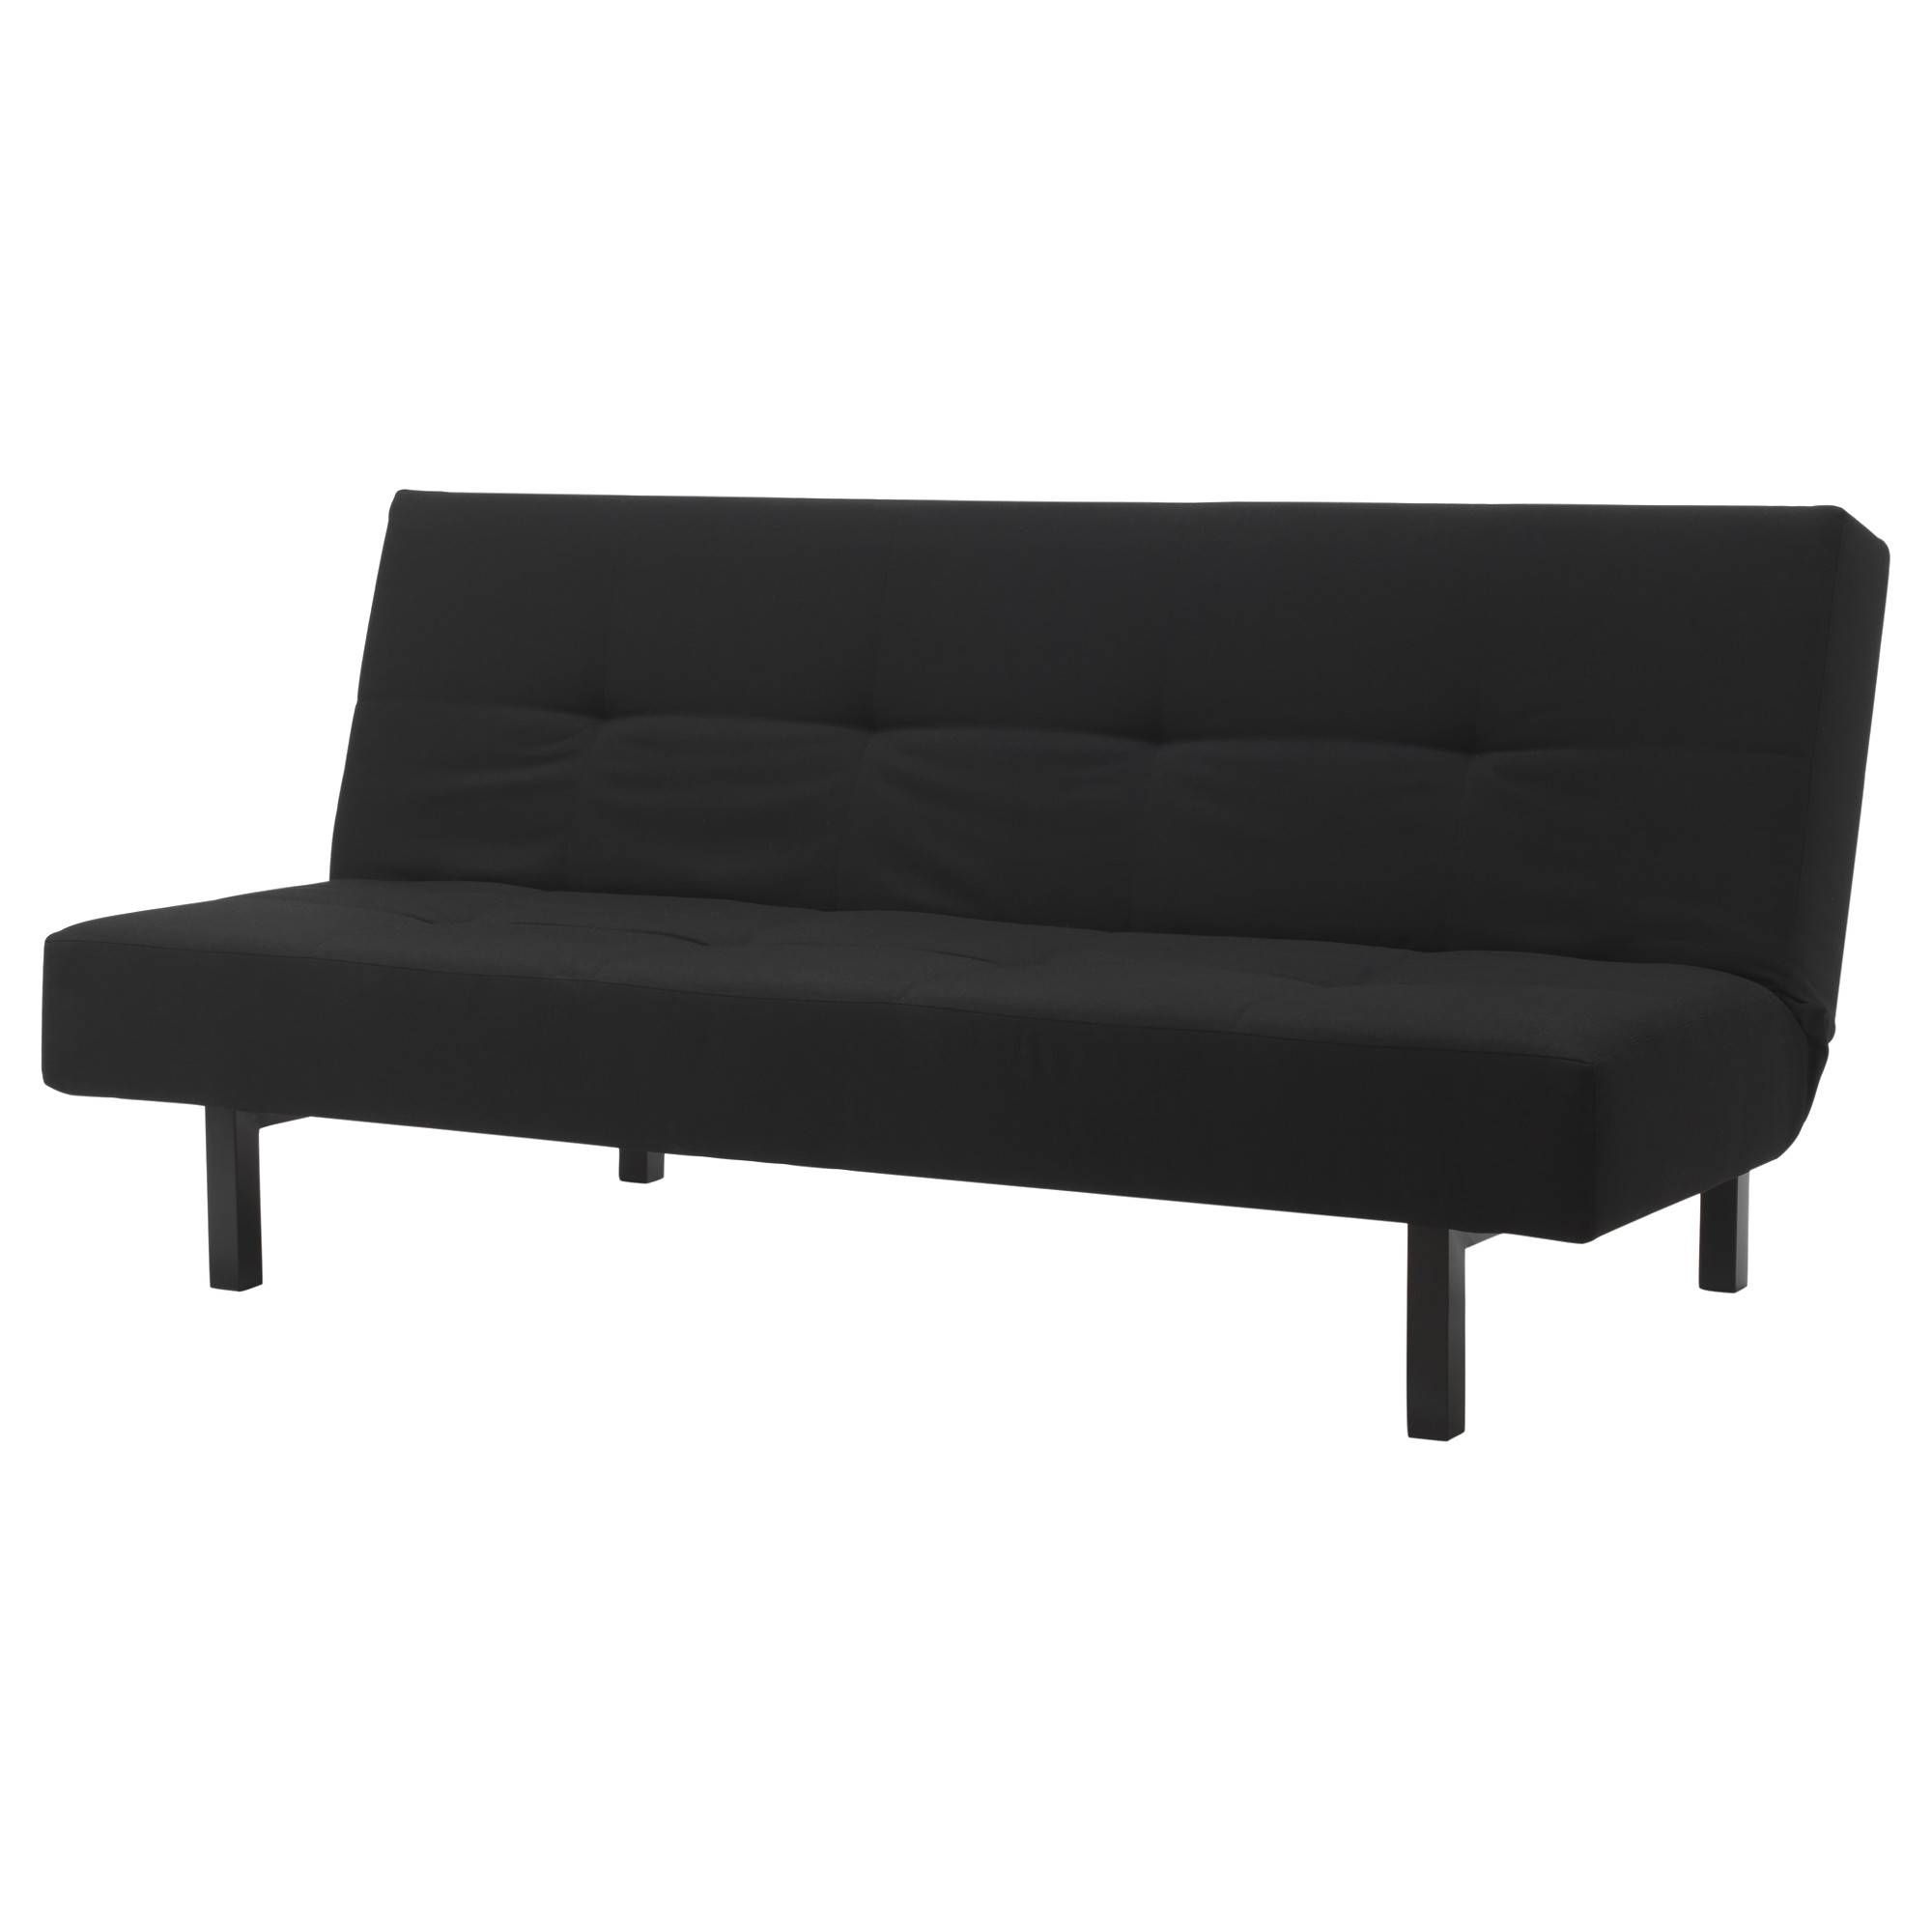 Sleeper Sofas & Chair Beds – Ikea Intended For Cheap Single Sofa Bed Chairs (View 5 of 30)